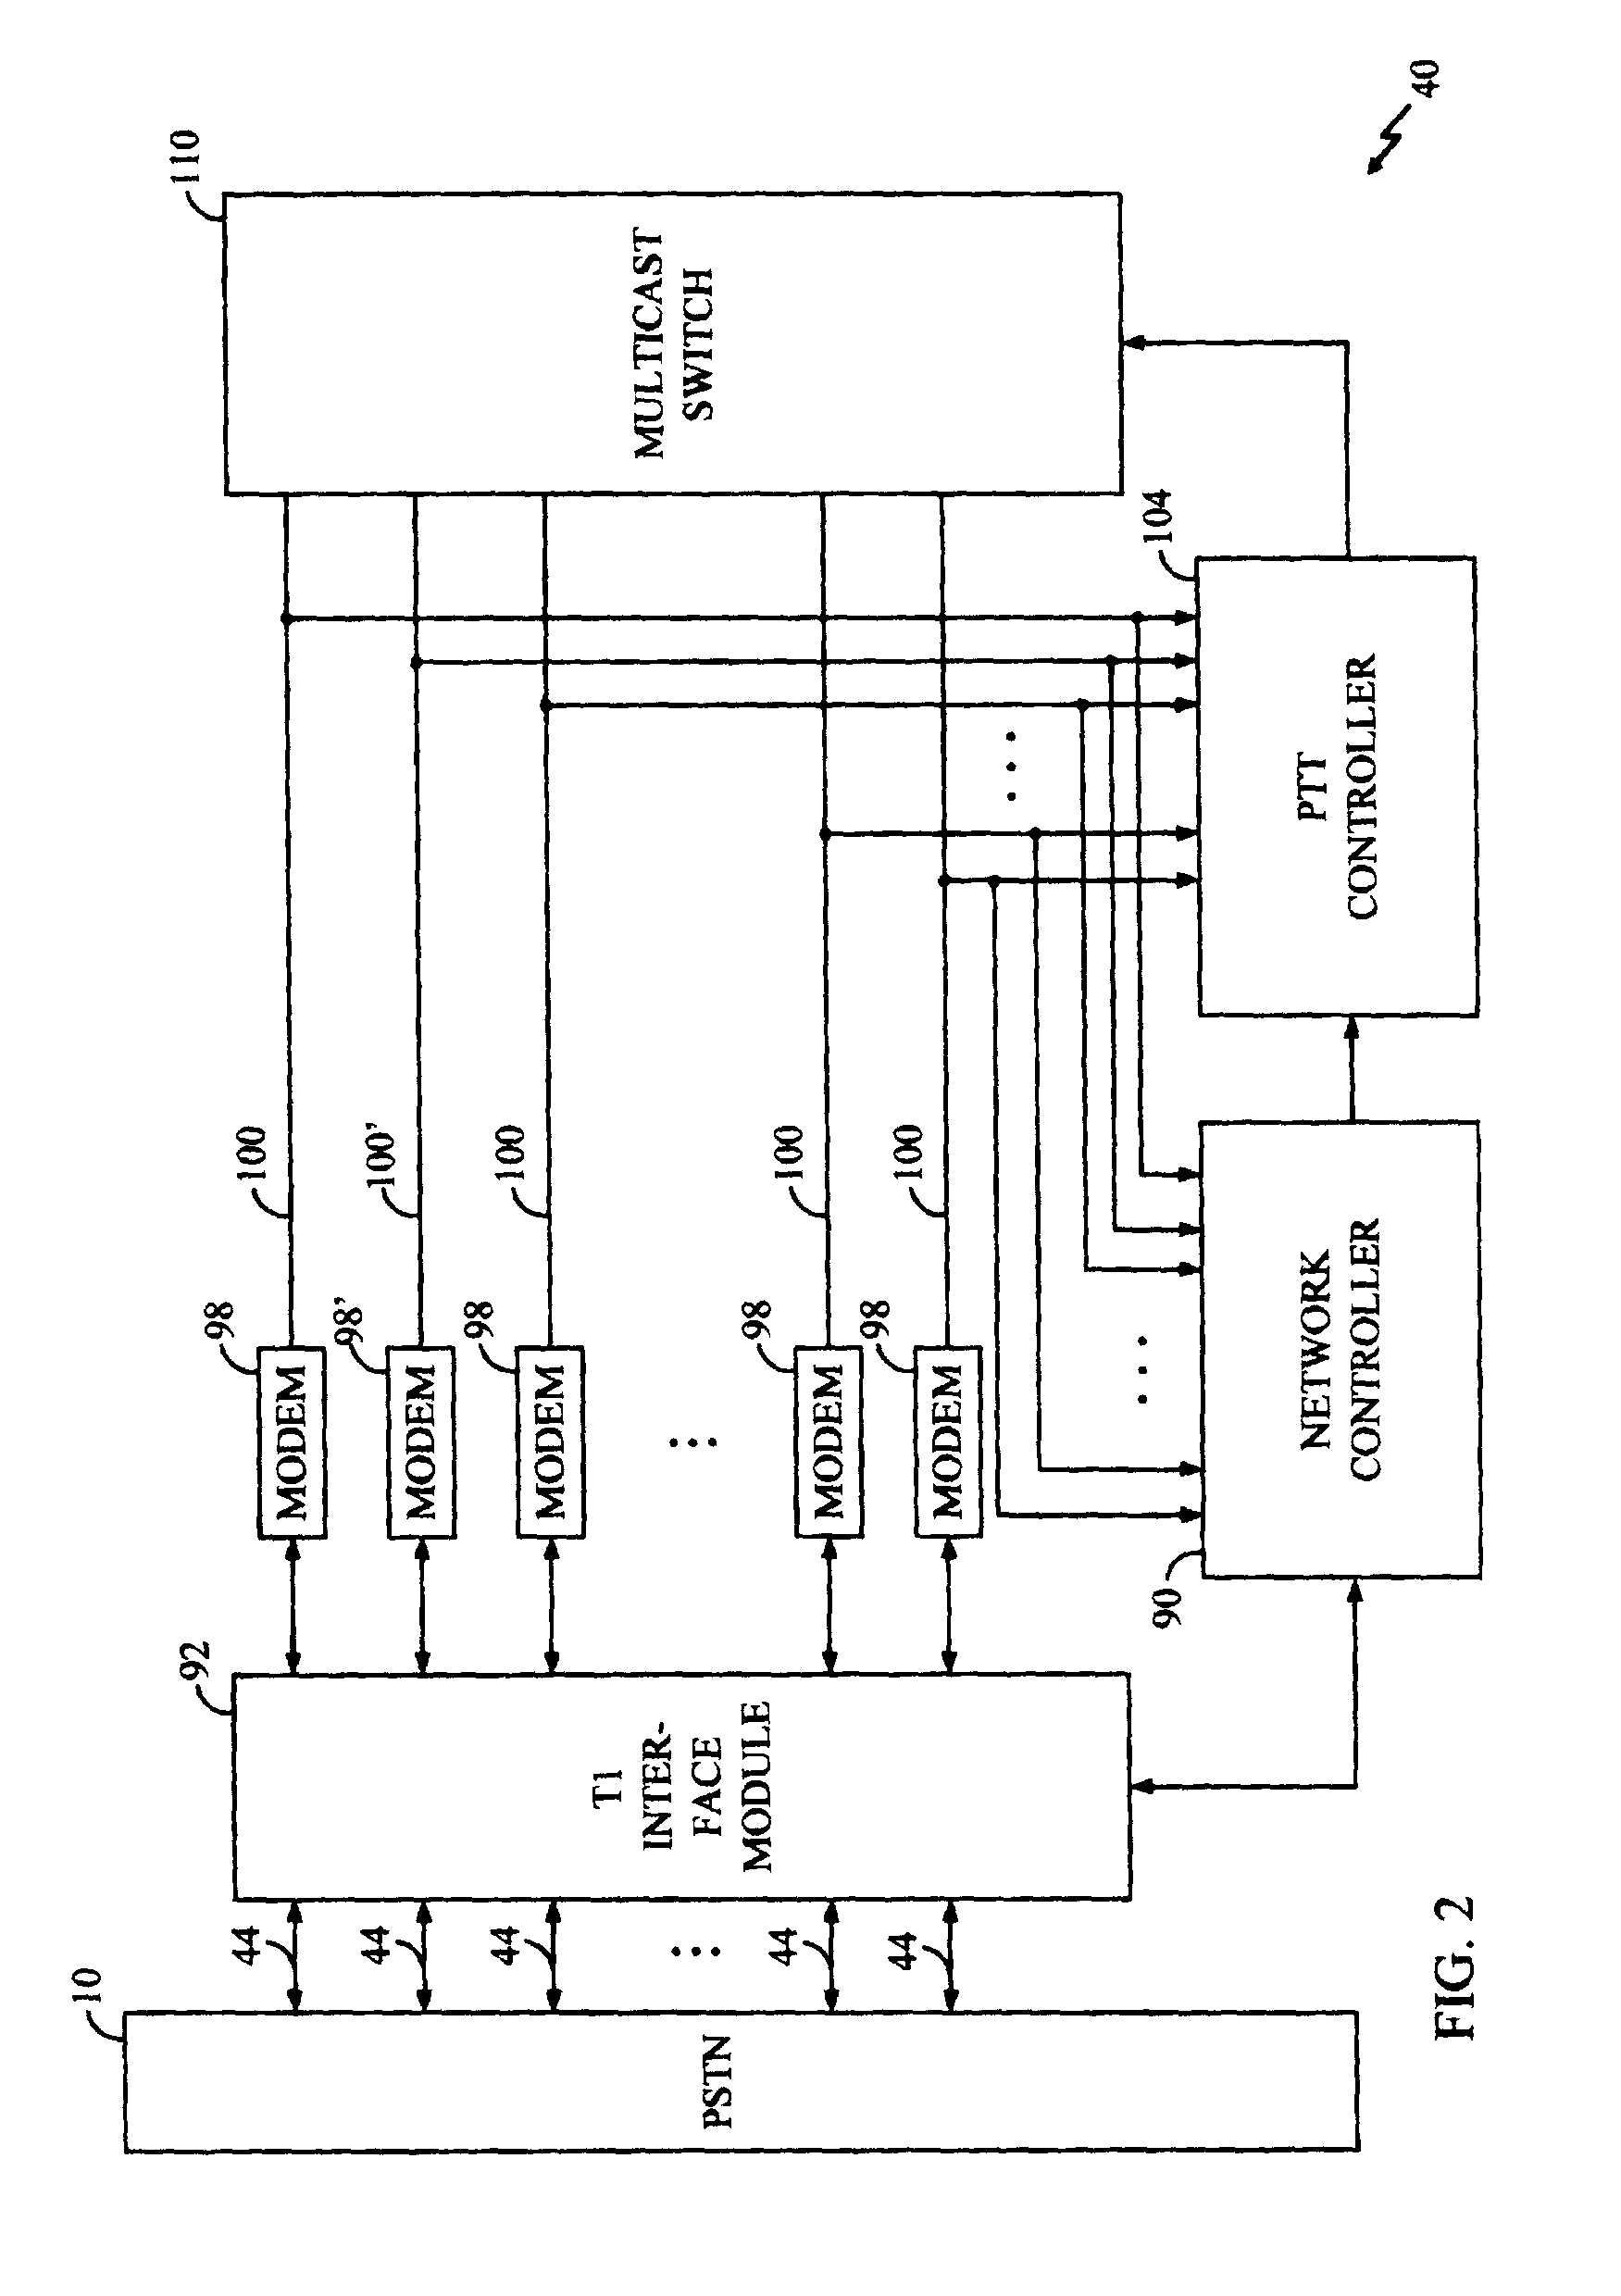 Method and apparatus for providing a private communication system in a public switched telephone network